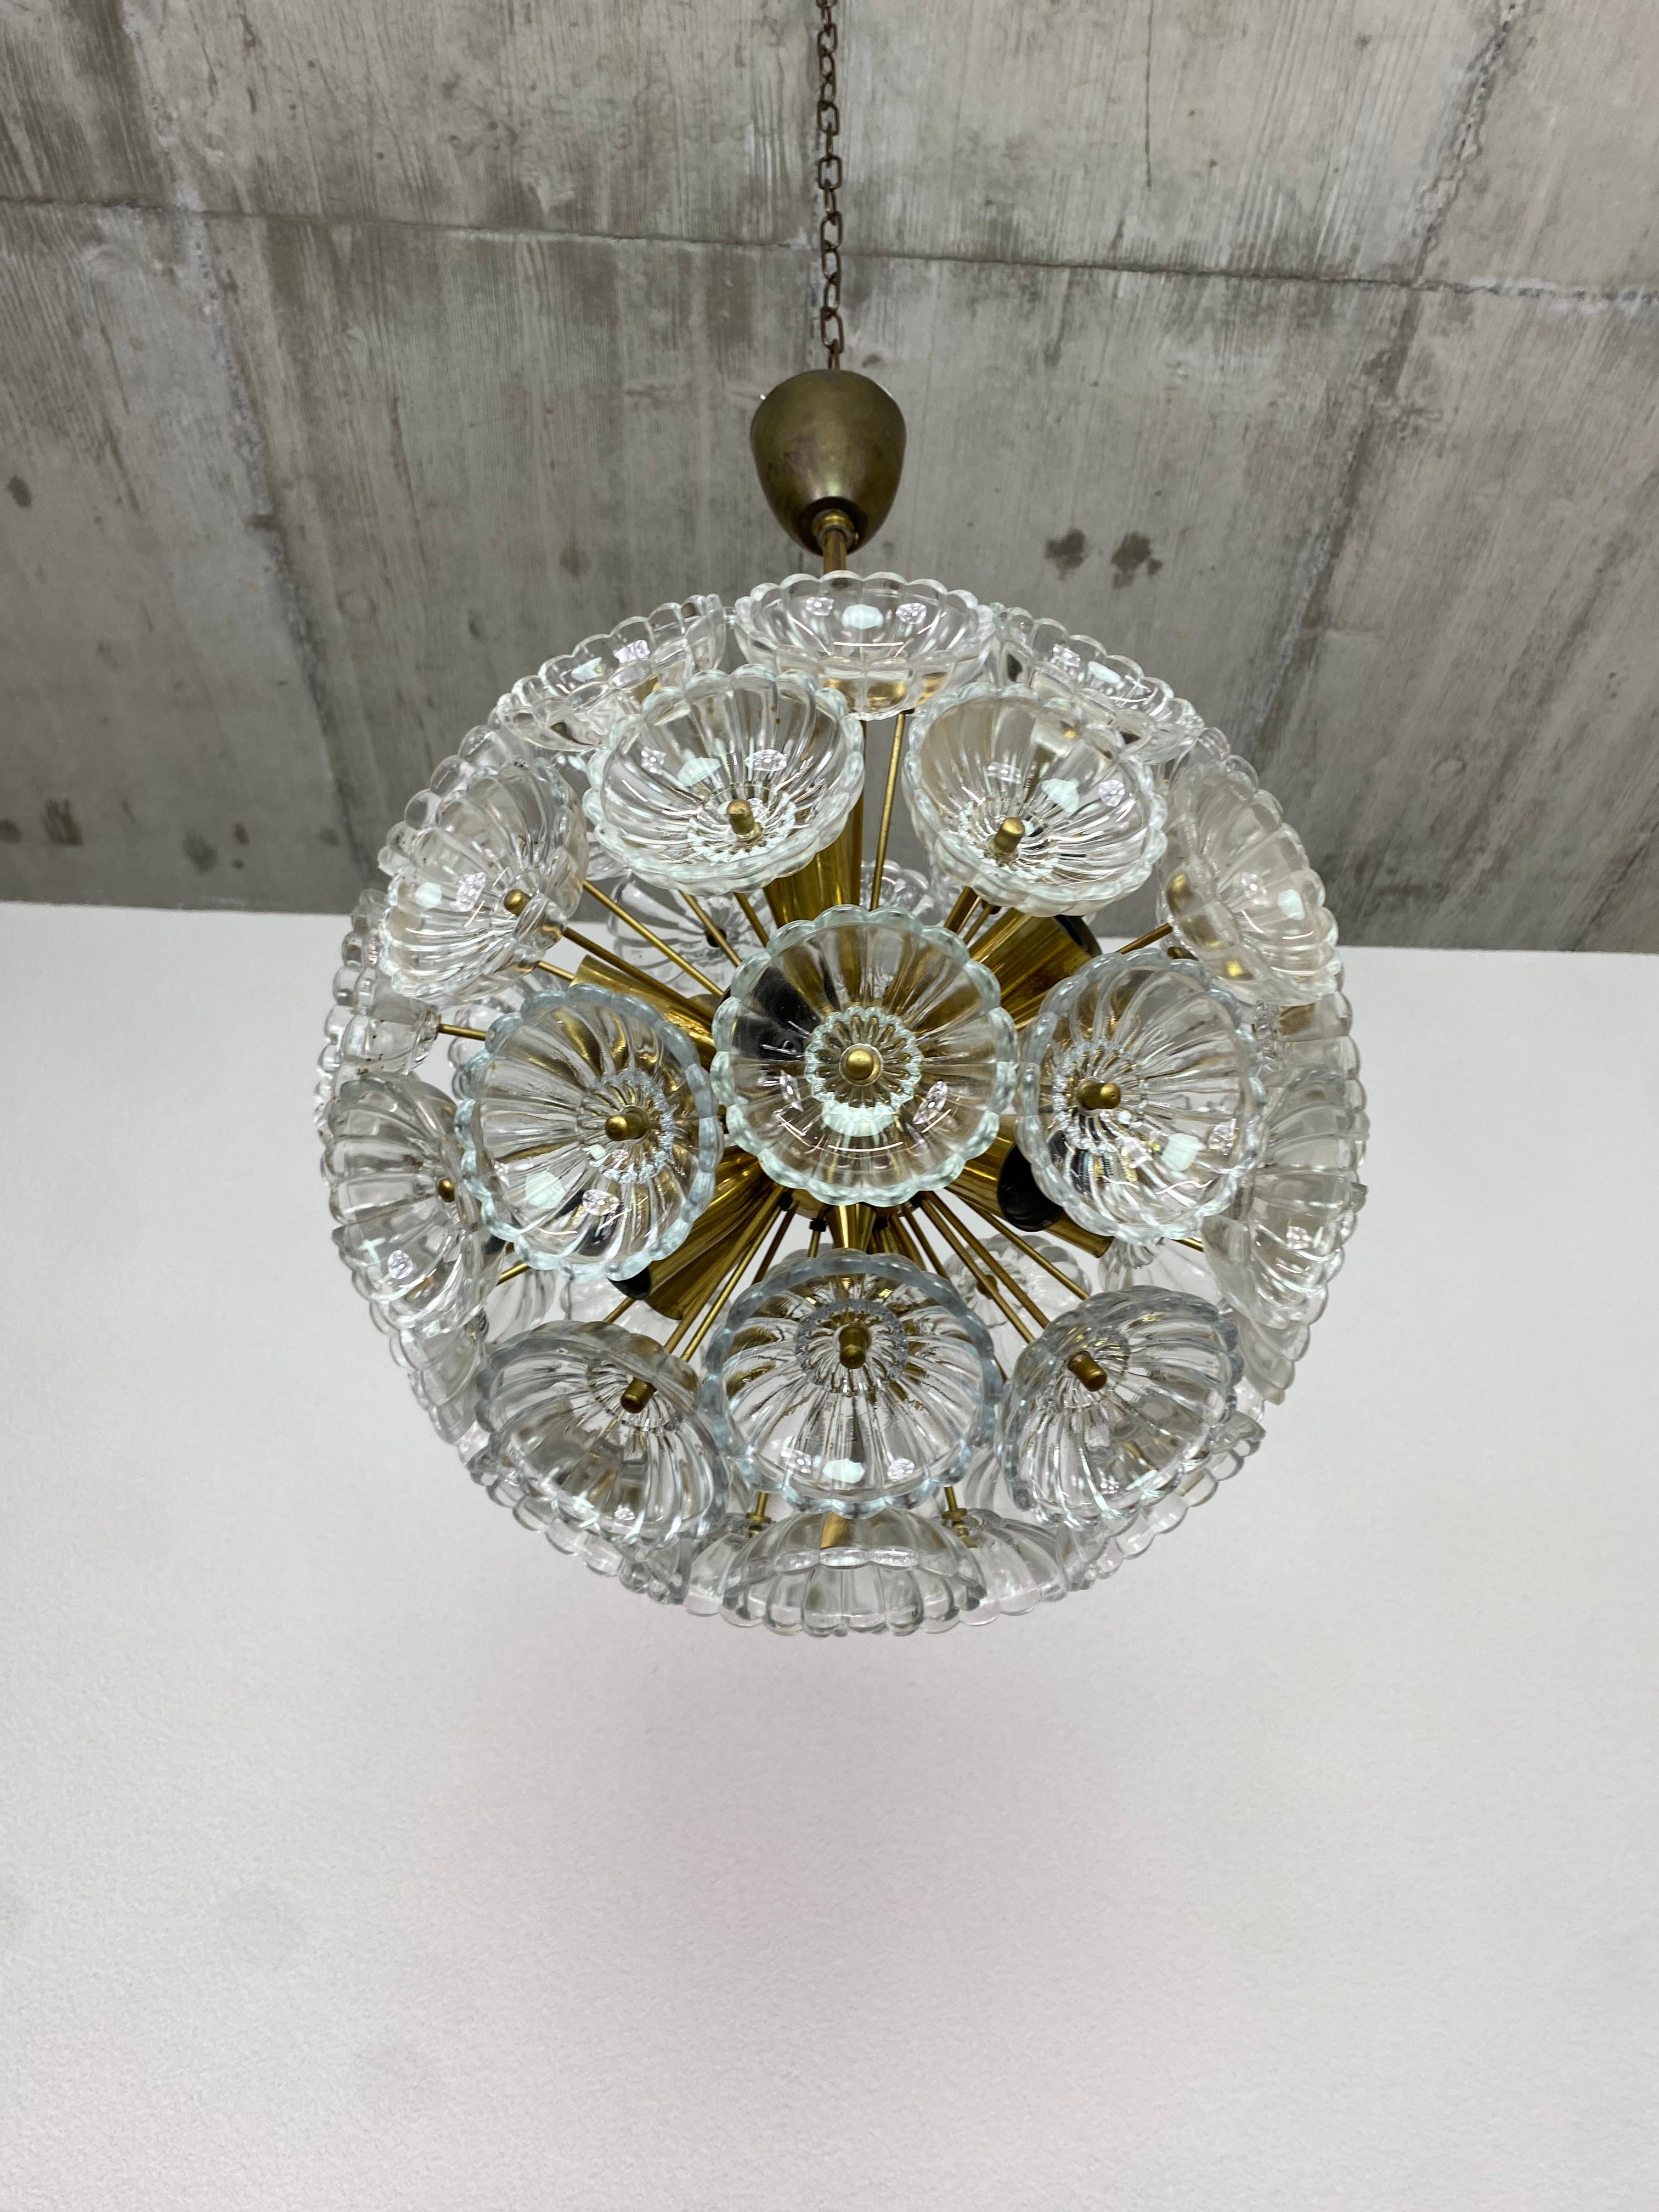 Dandelion chandelier by Kamenický Šenov in original vintage condition. All glass parts are in 100% condition. Metal brass painted skeleton shows slight traces of rust.